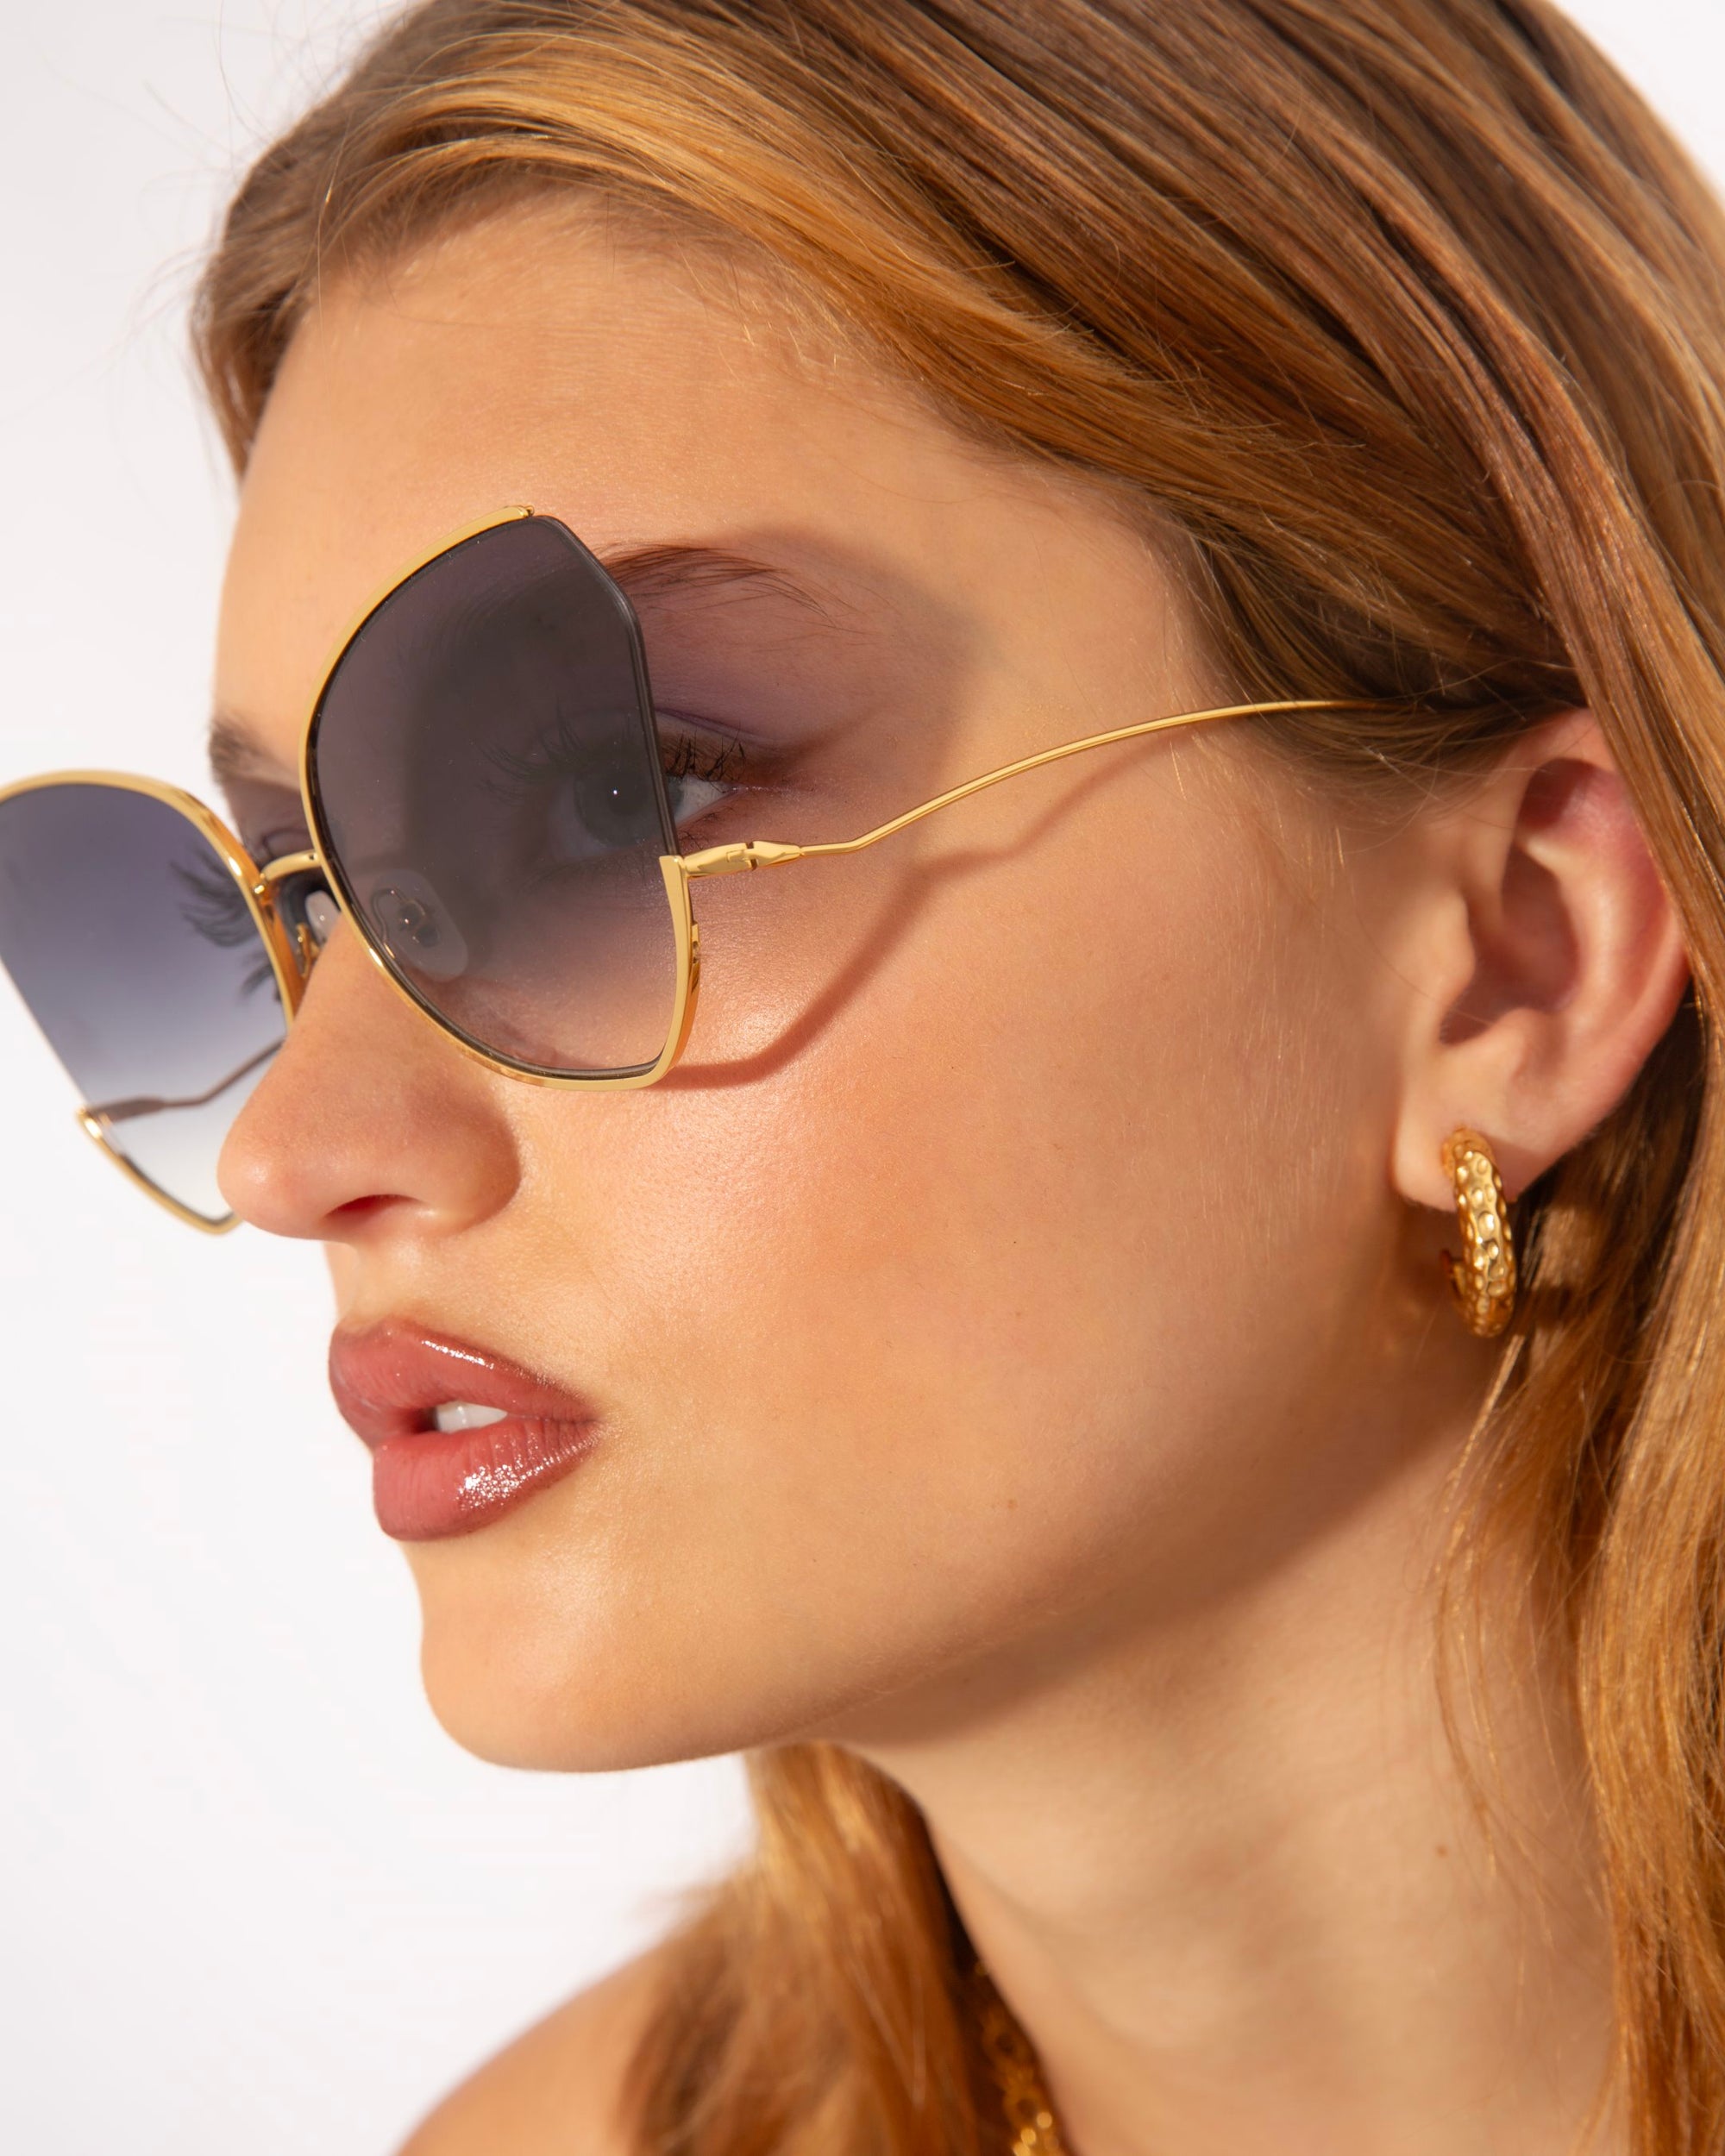 A woman with long, light brown hair is wearing large, dark Watercolour sunglasses by For Art's Sake® and gold-plated stainless steel hoop earrings. Her lips are glossed, and she is gazing to the side. The background is white, making her accessories stand out.